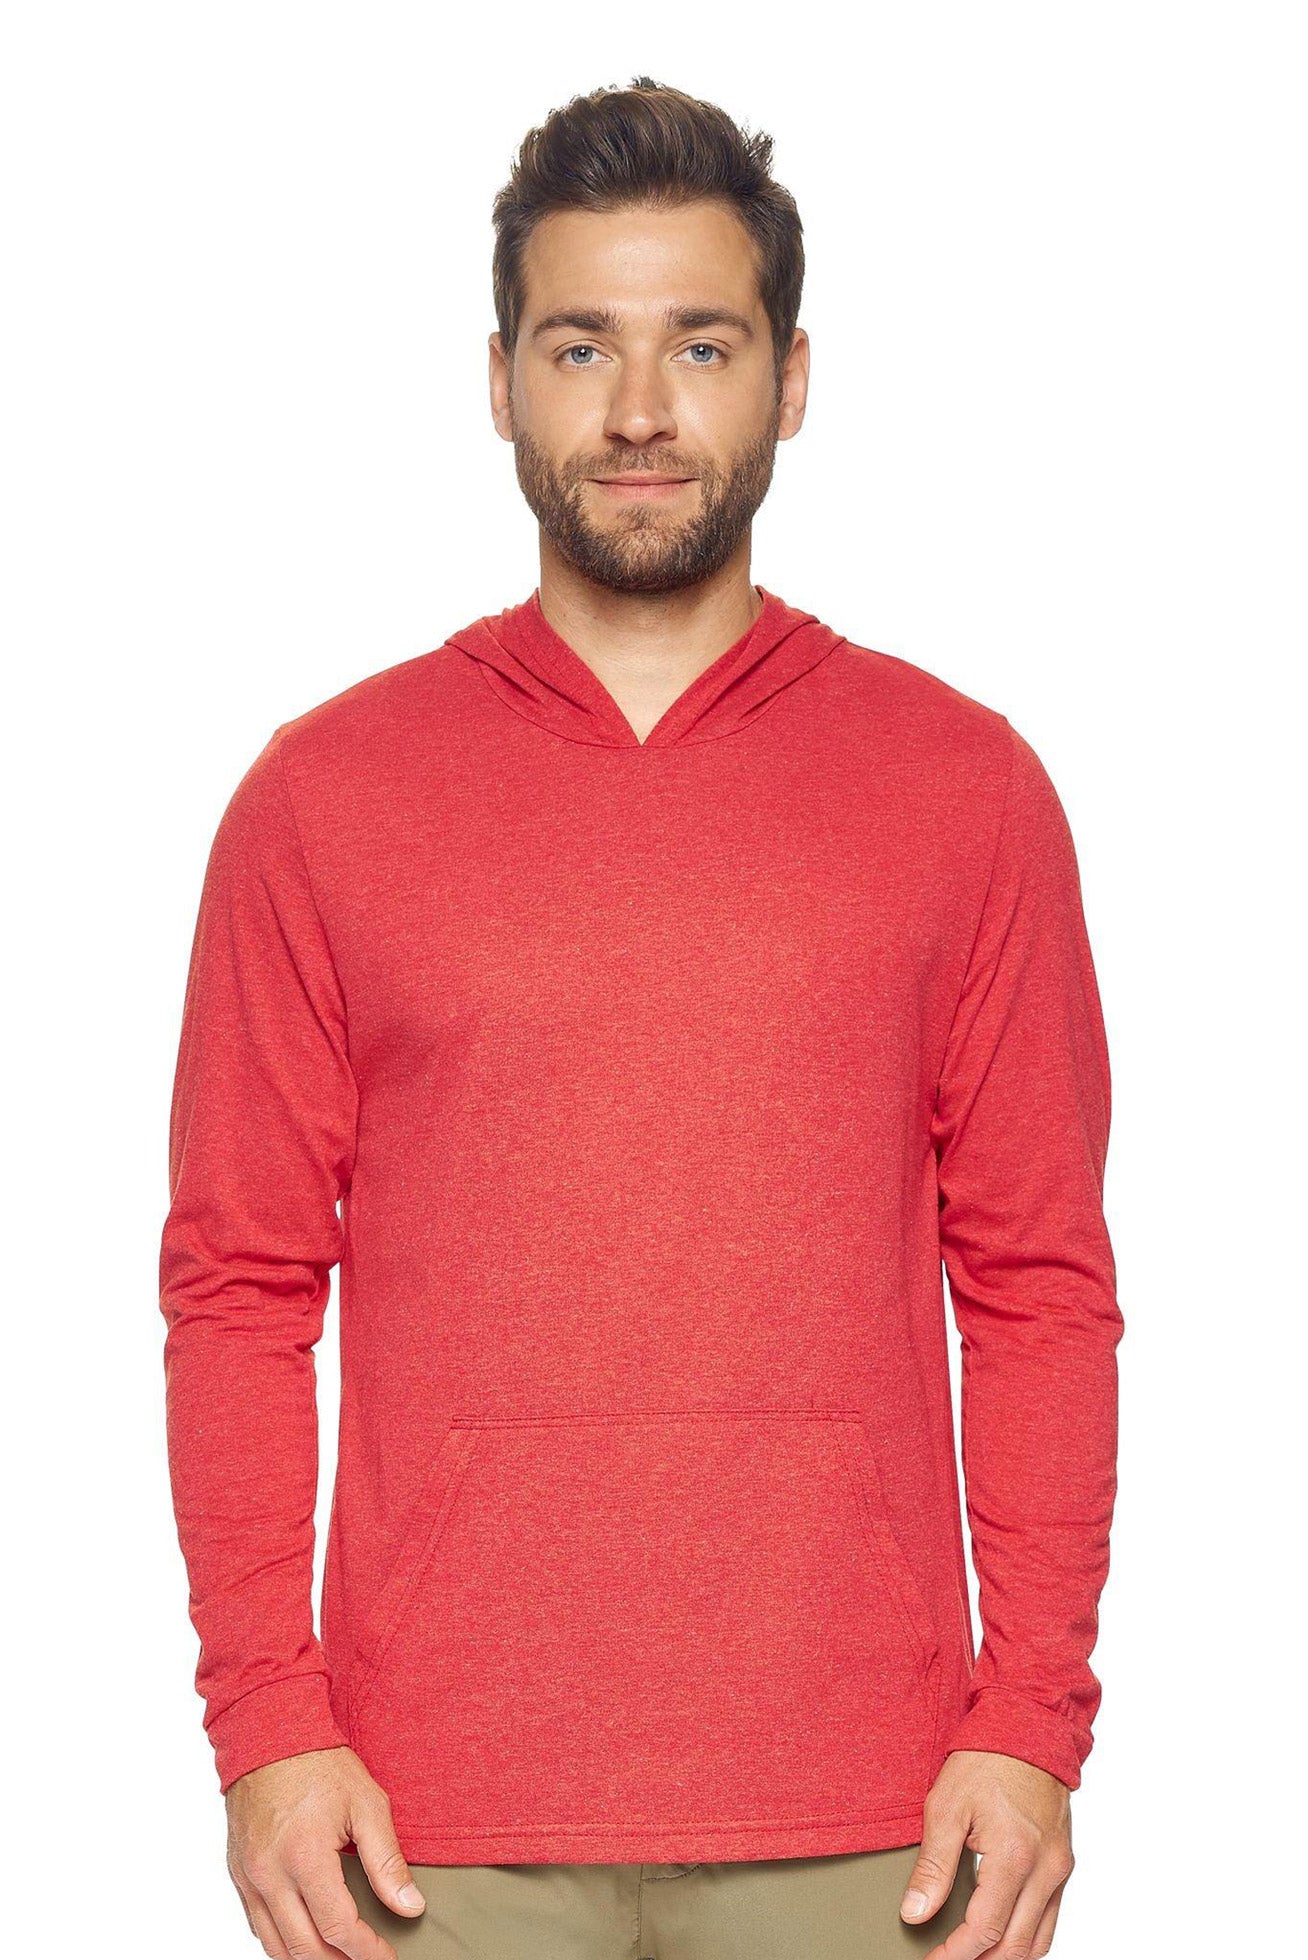 Expert Apparel Men's Hoodie Shirt Performance Dark Heather Red Made in USA#color_dark-heather-red